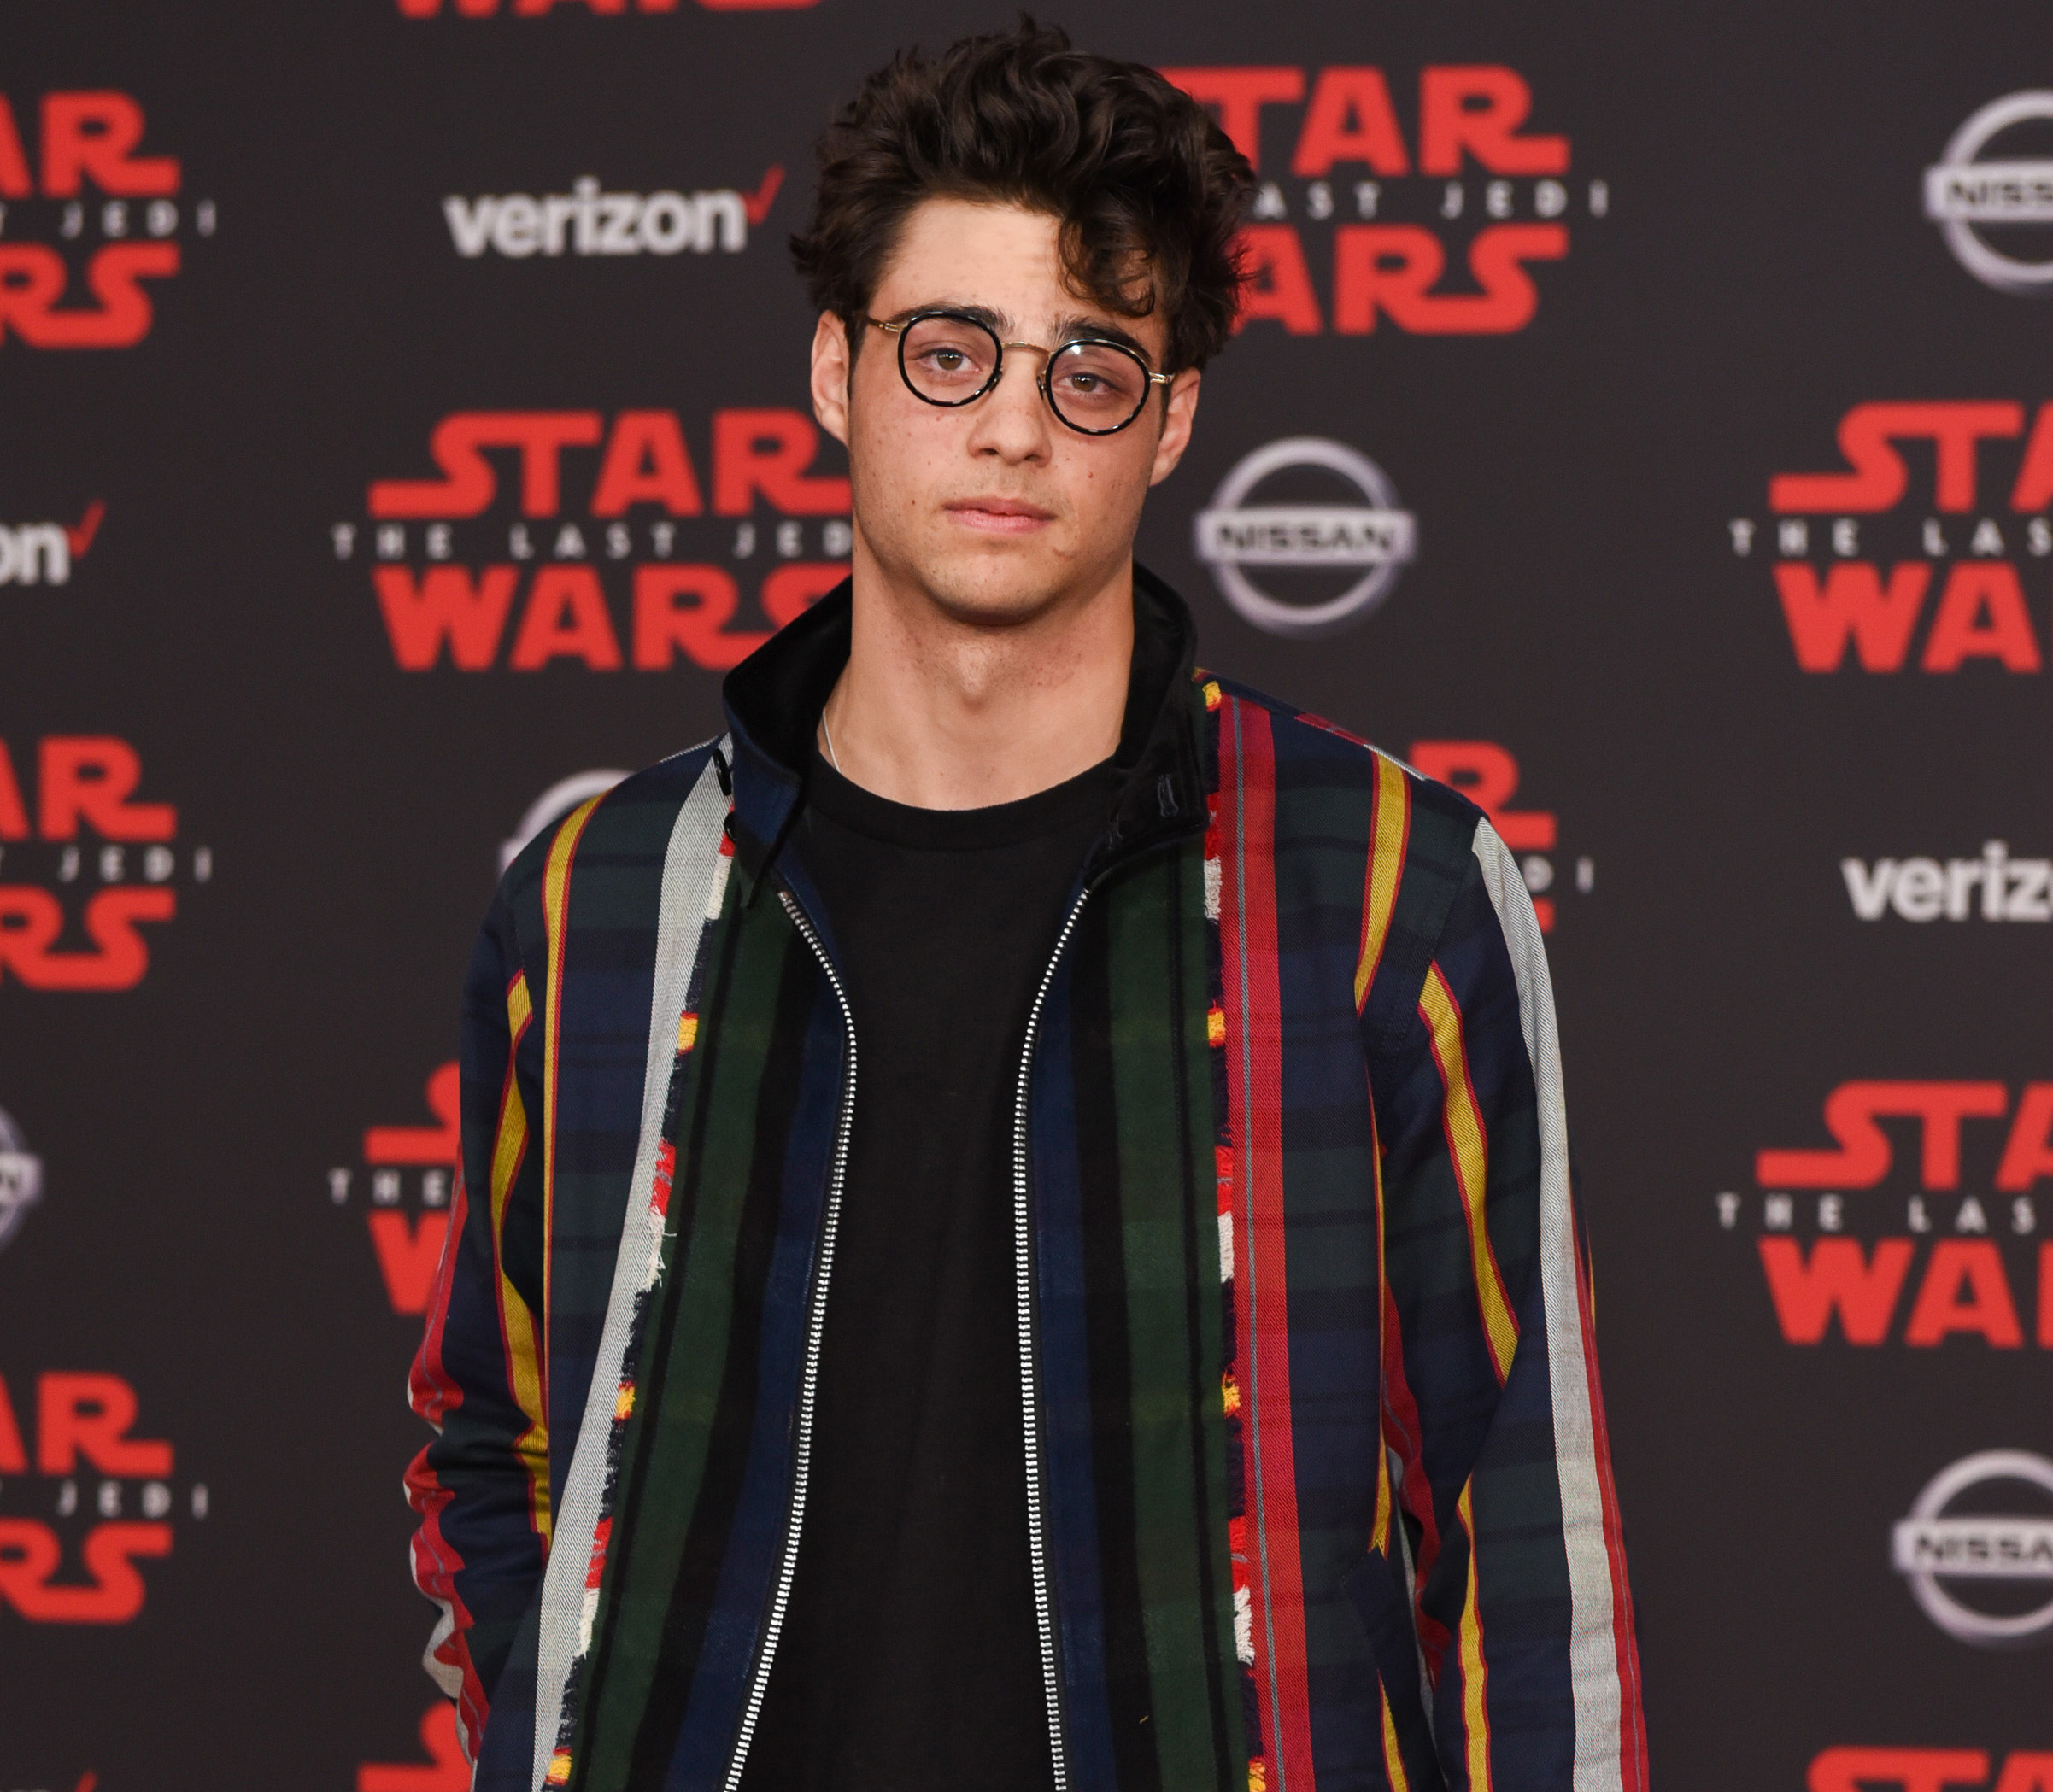 Here's What Noah Centineo Had to Say About Those Leaked Videos